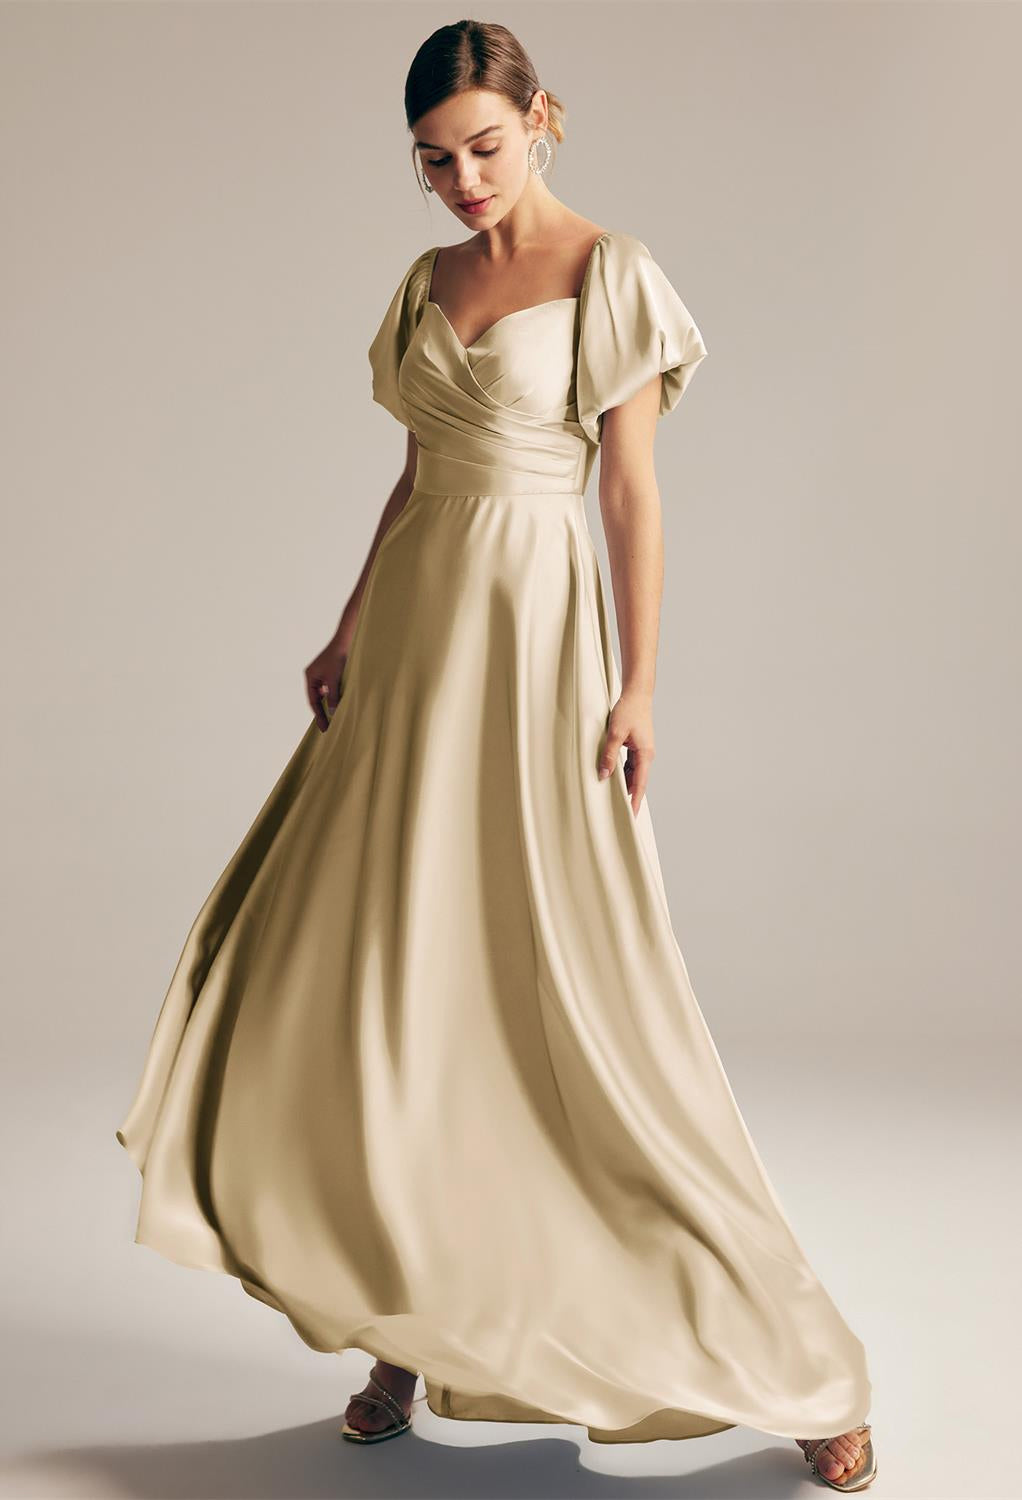 The bride is wearing a beige Dey - Satin Charmeuse Bridesmaid Dress - Off The Rack by Bergamot Bridal.